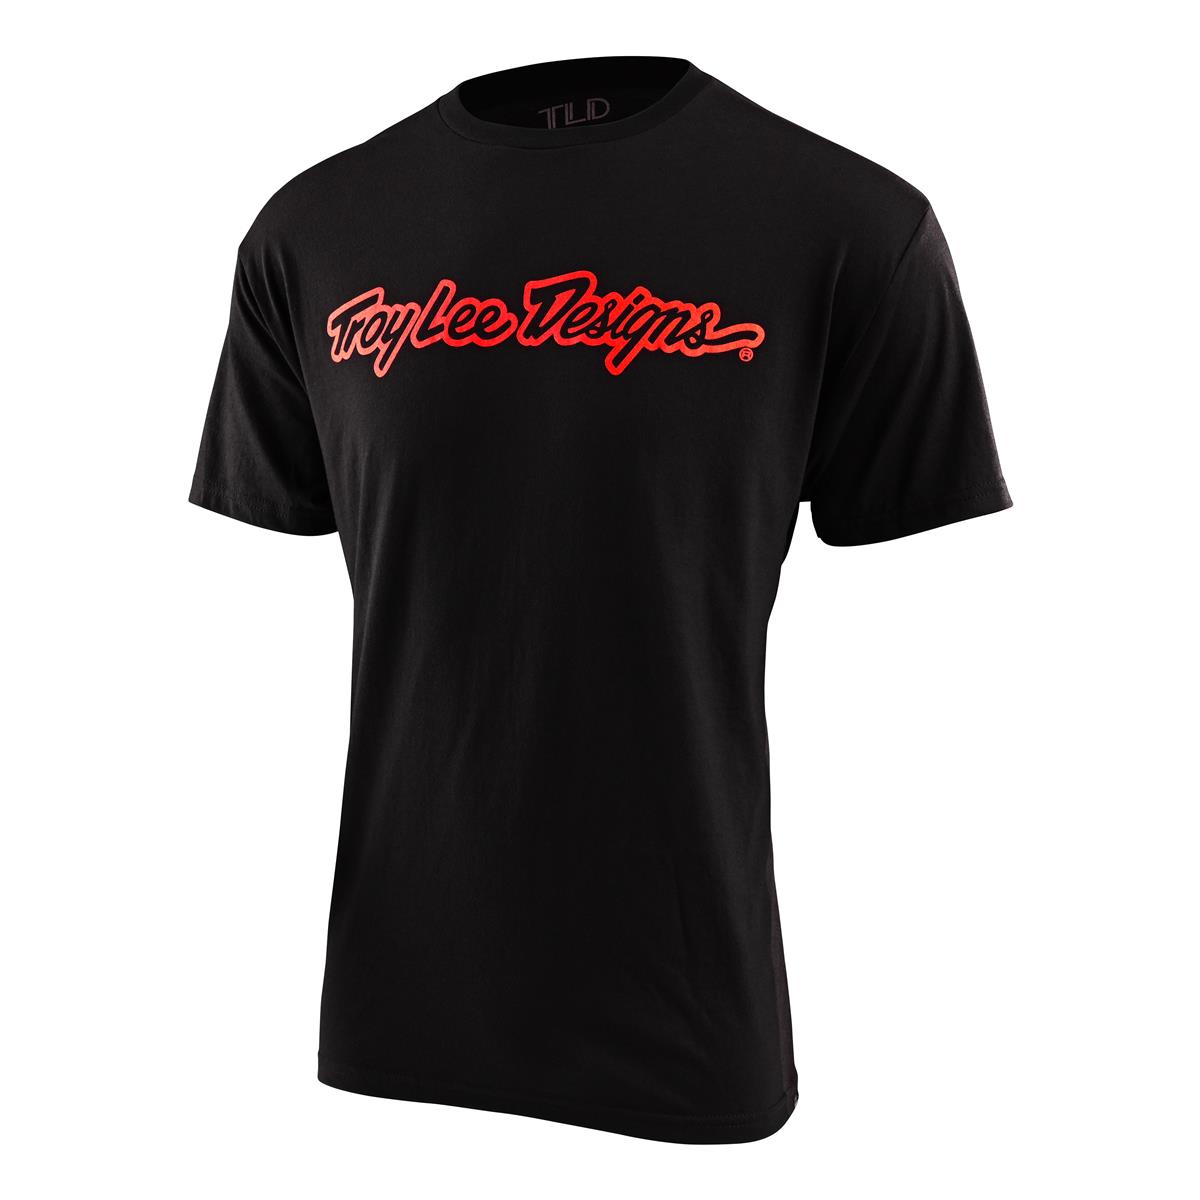 Troy Lee Designs T-Shirt Signature Black/Glo Red